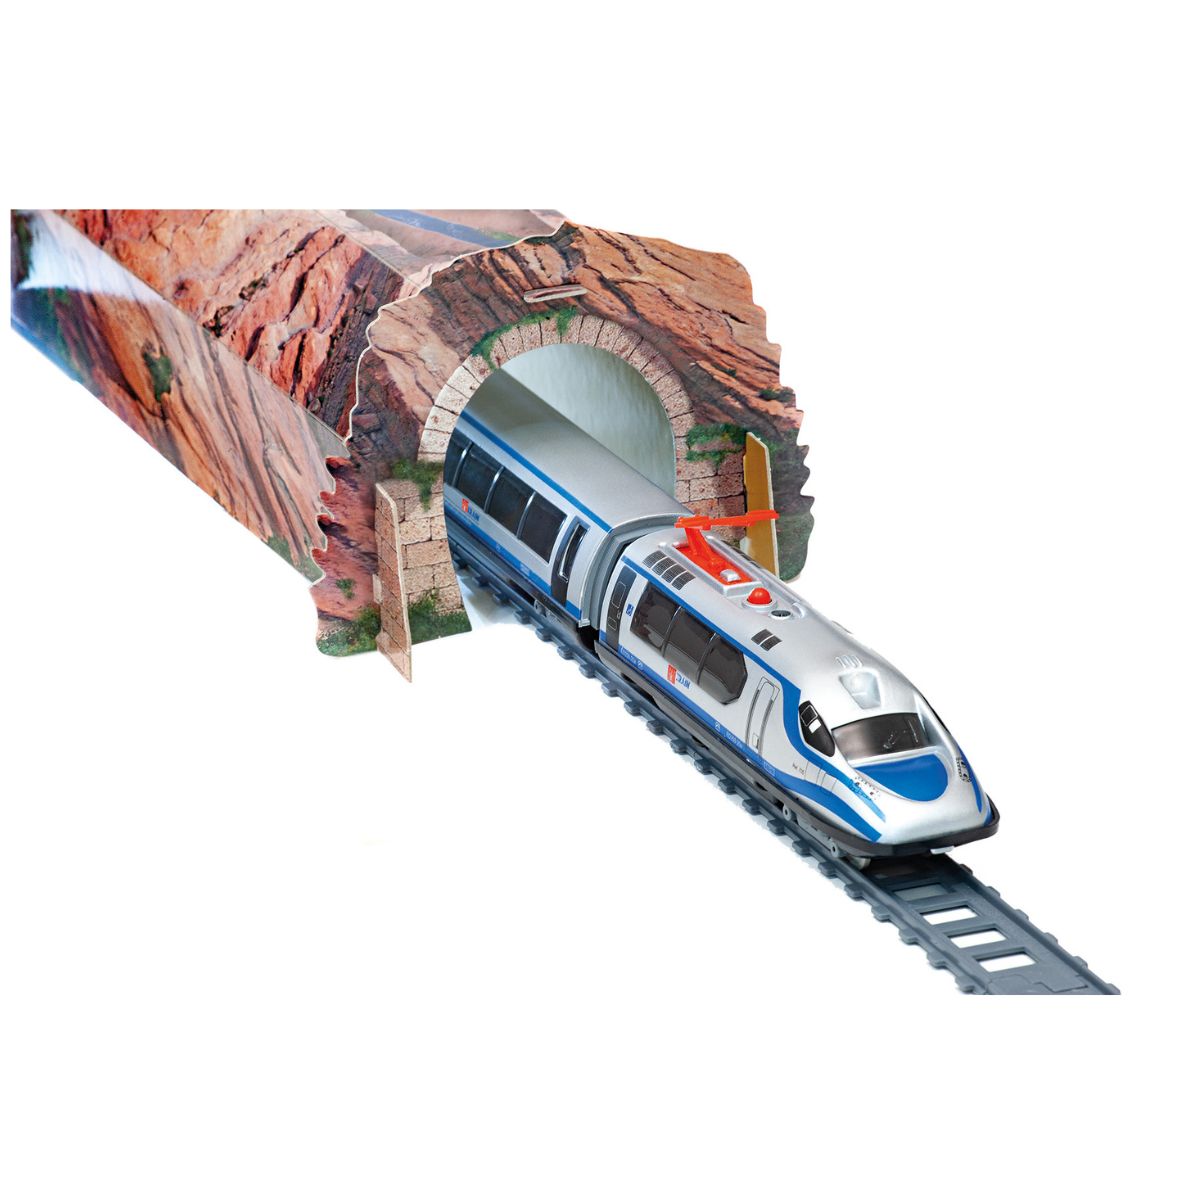 HS Train with station, train lane and mountain tunnel.